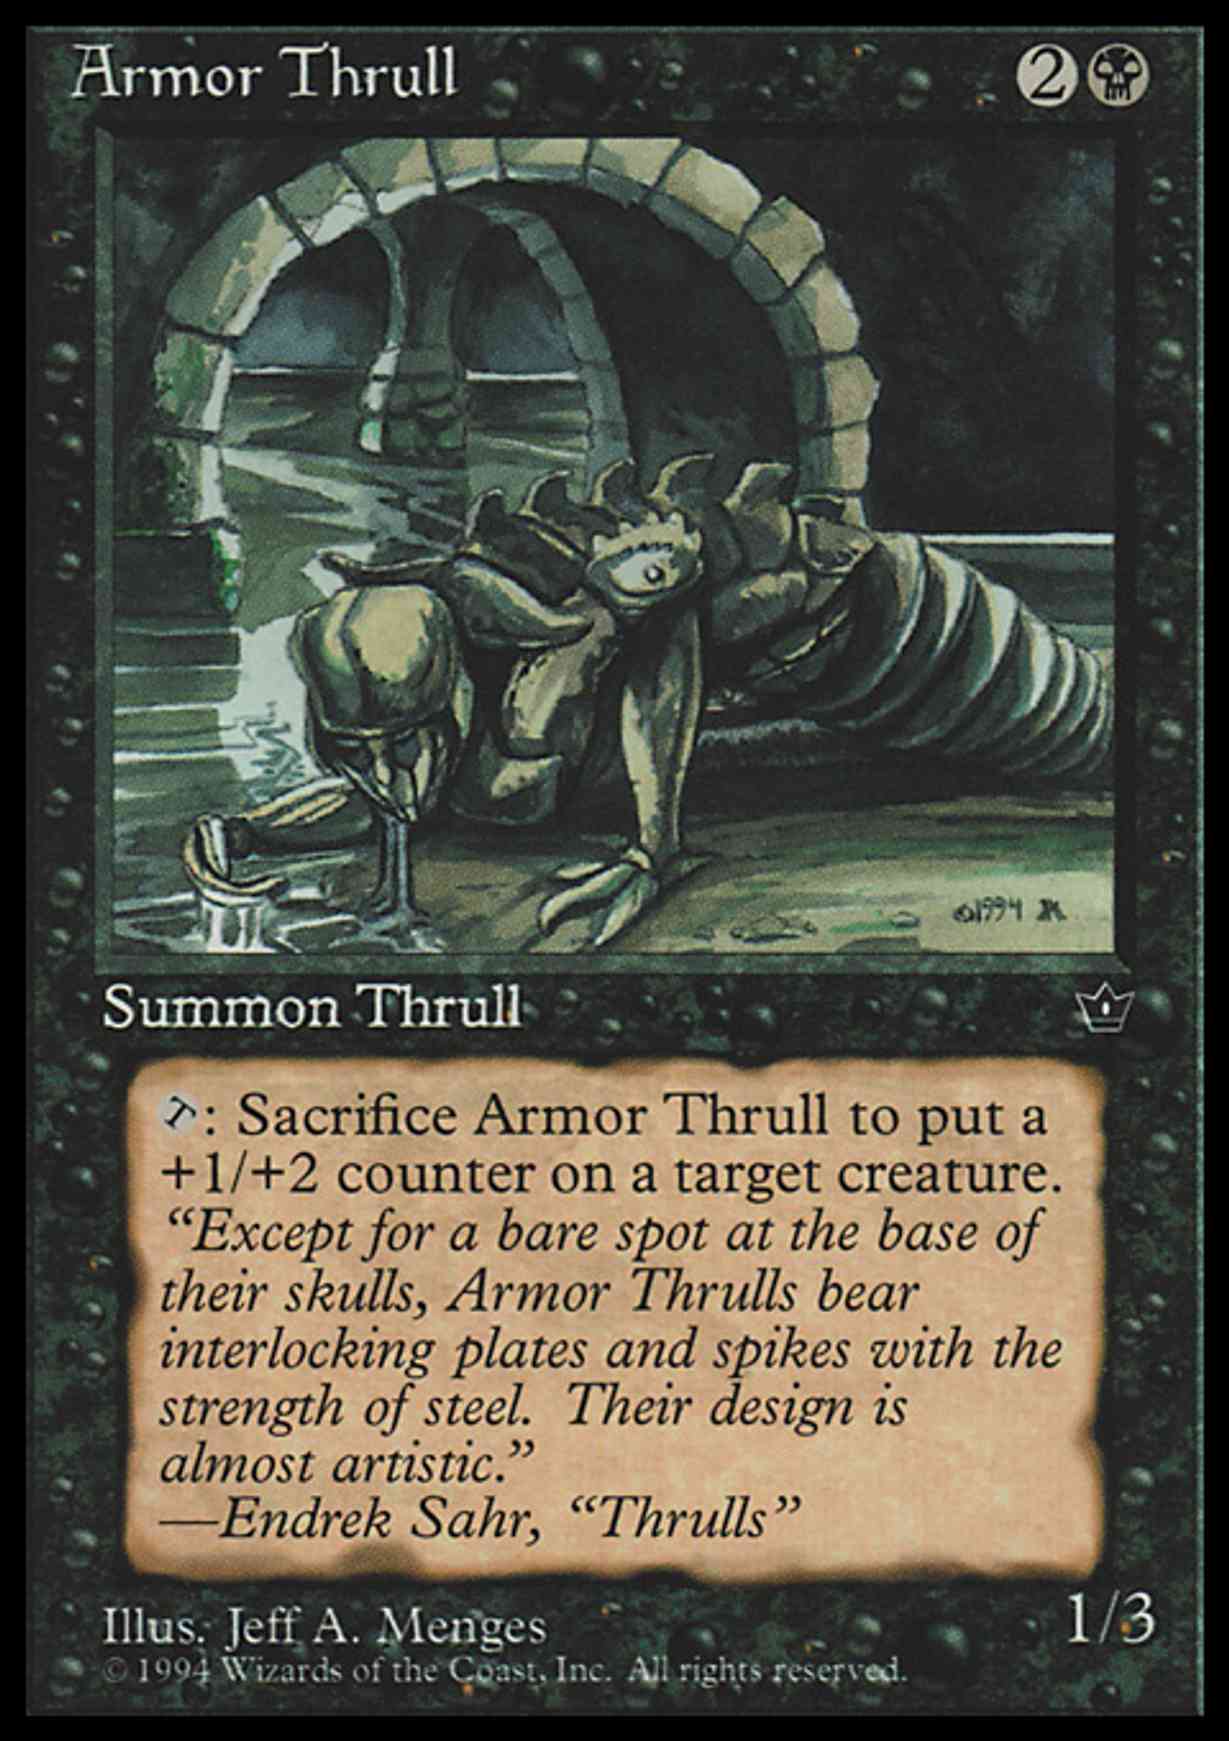 Armor Thrull (Menges) magic card front